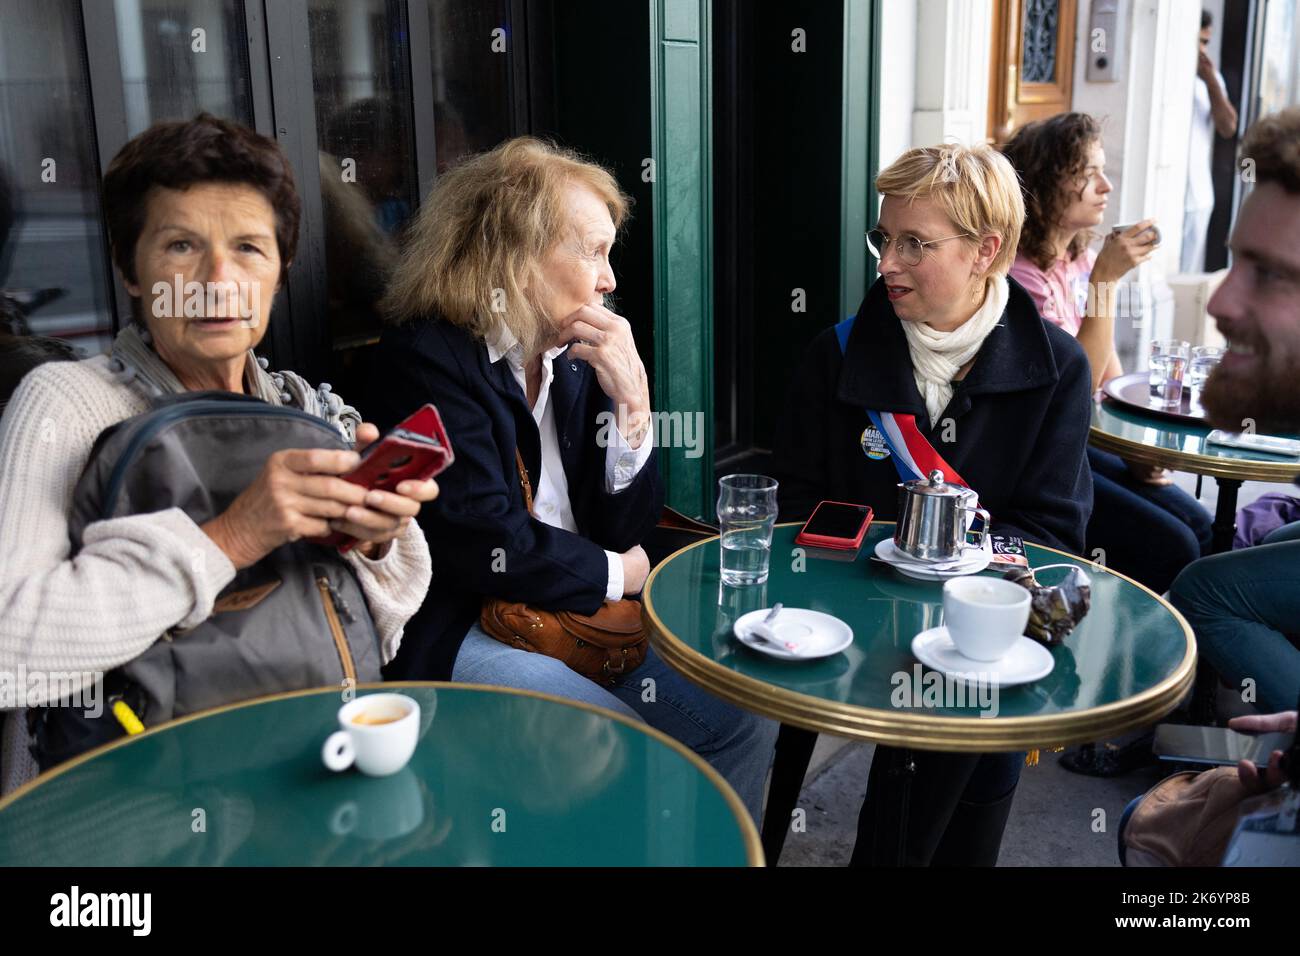 2022 Nobel Literature Prize laureate French novelist Annie Ernaux and LFI deputy Clementine Autain at the terrasse of a cafe during a rally against soaring living costs and climate inaction called by French left-wing coalition NUPES (New People Ecologic and Social Union) in Paris on October 16, 2022 Photo by Raphael Lafargue/ABACAPRESS.COM Stock Photo